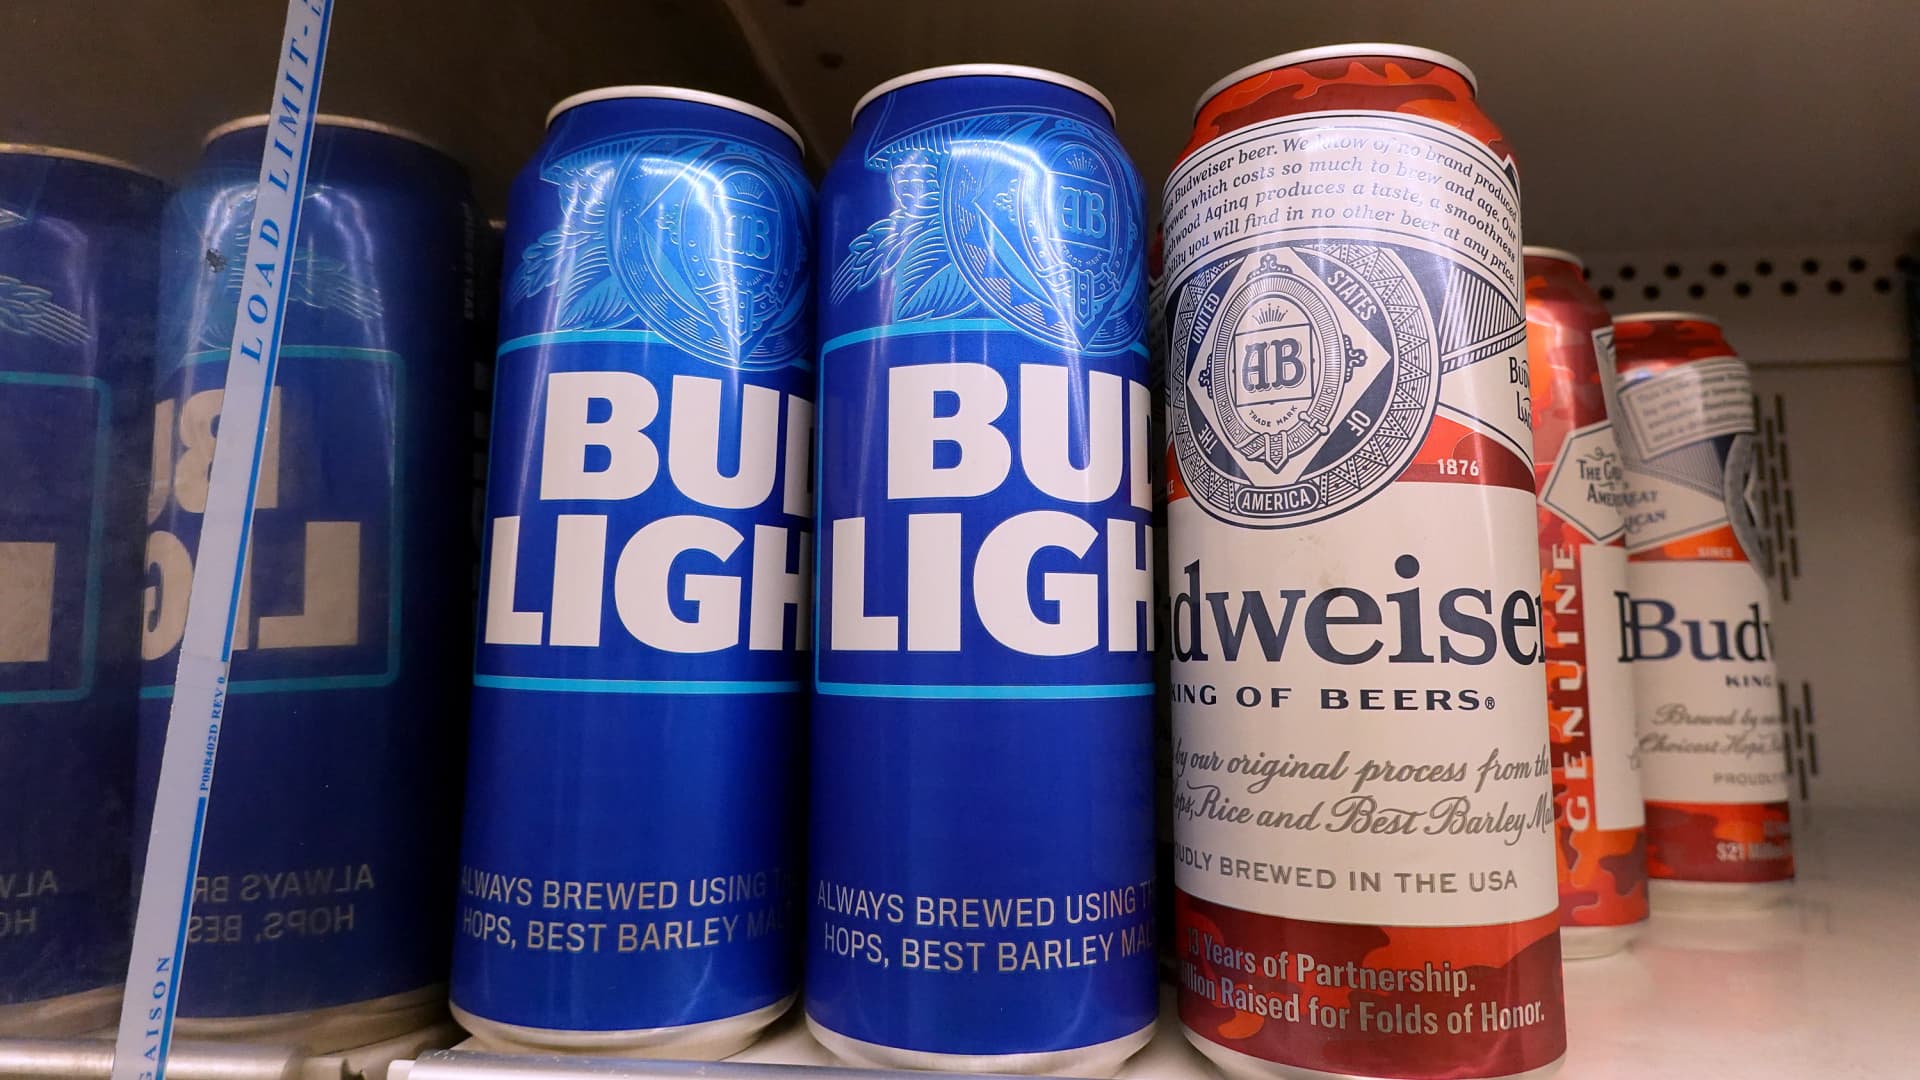 Beer market isolated from supply chain woes, Budweiser owner says